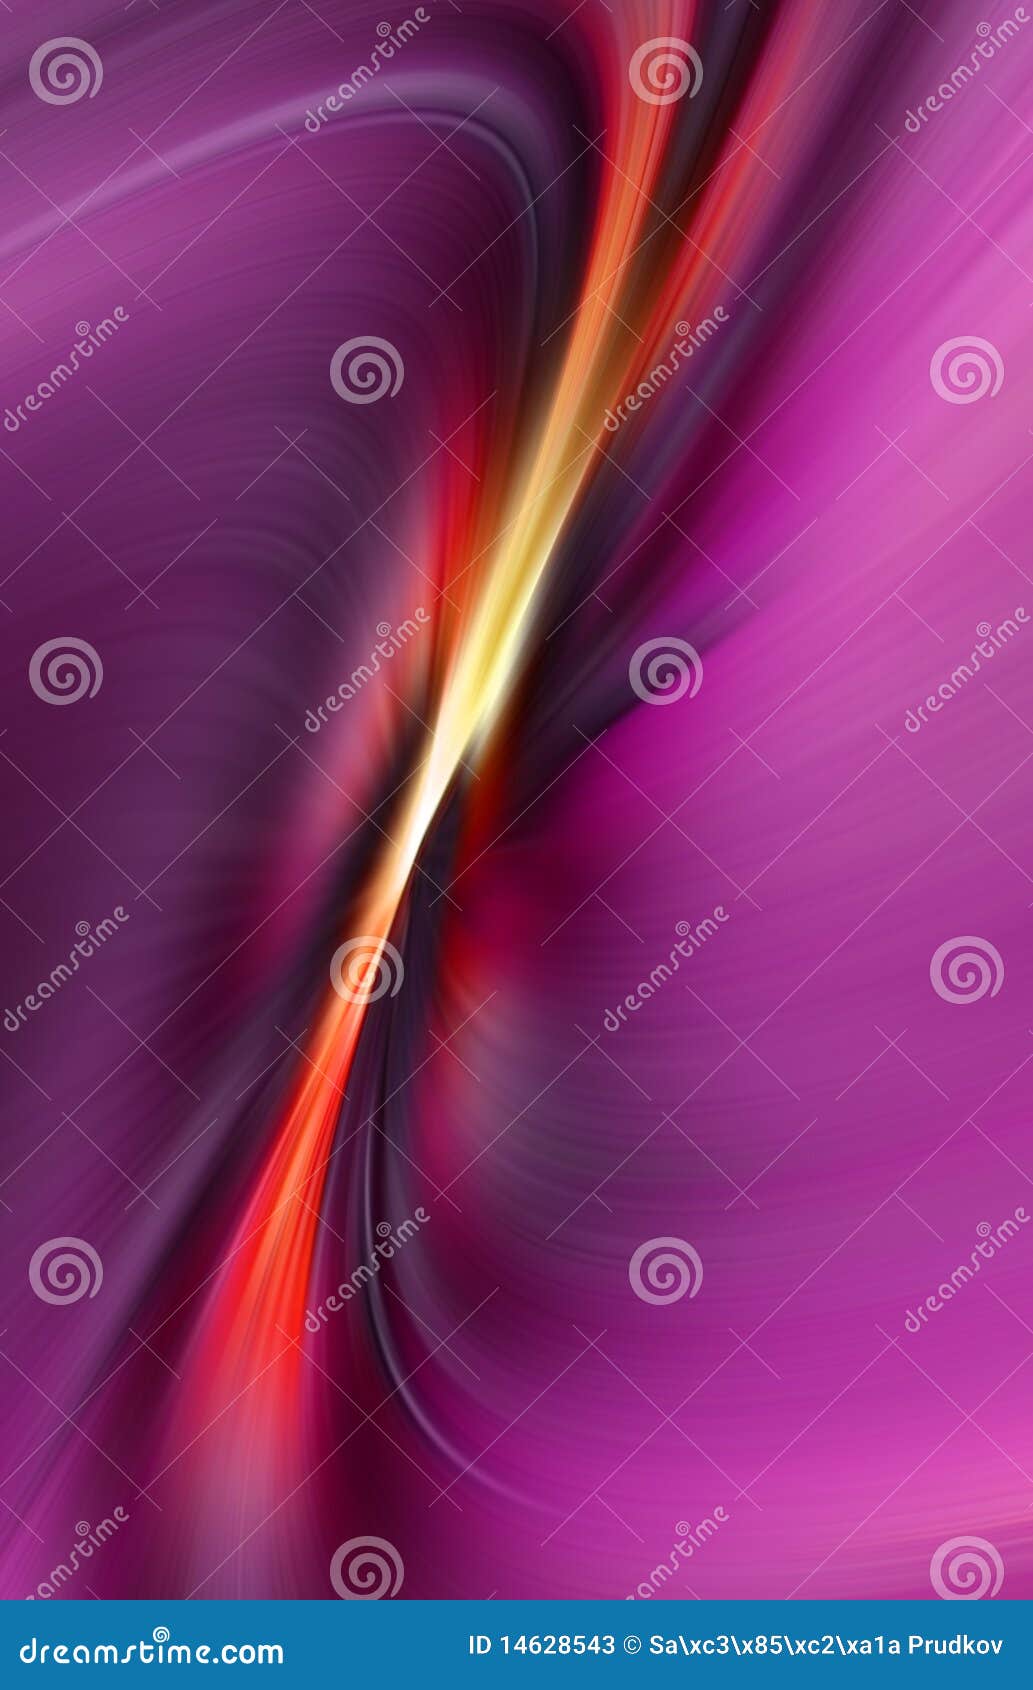 abstract wavy background in purple tones